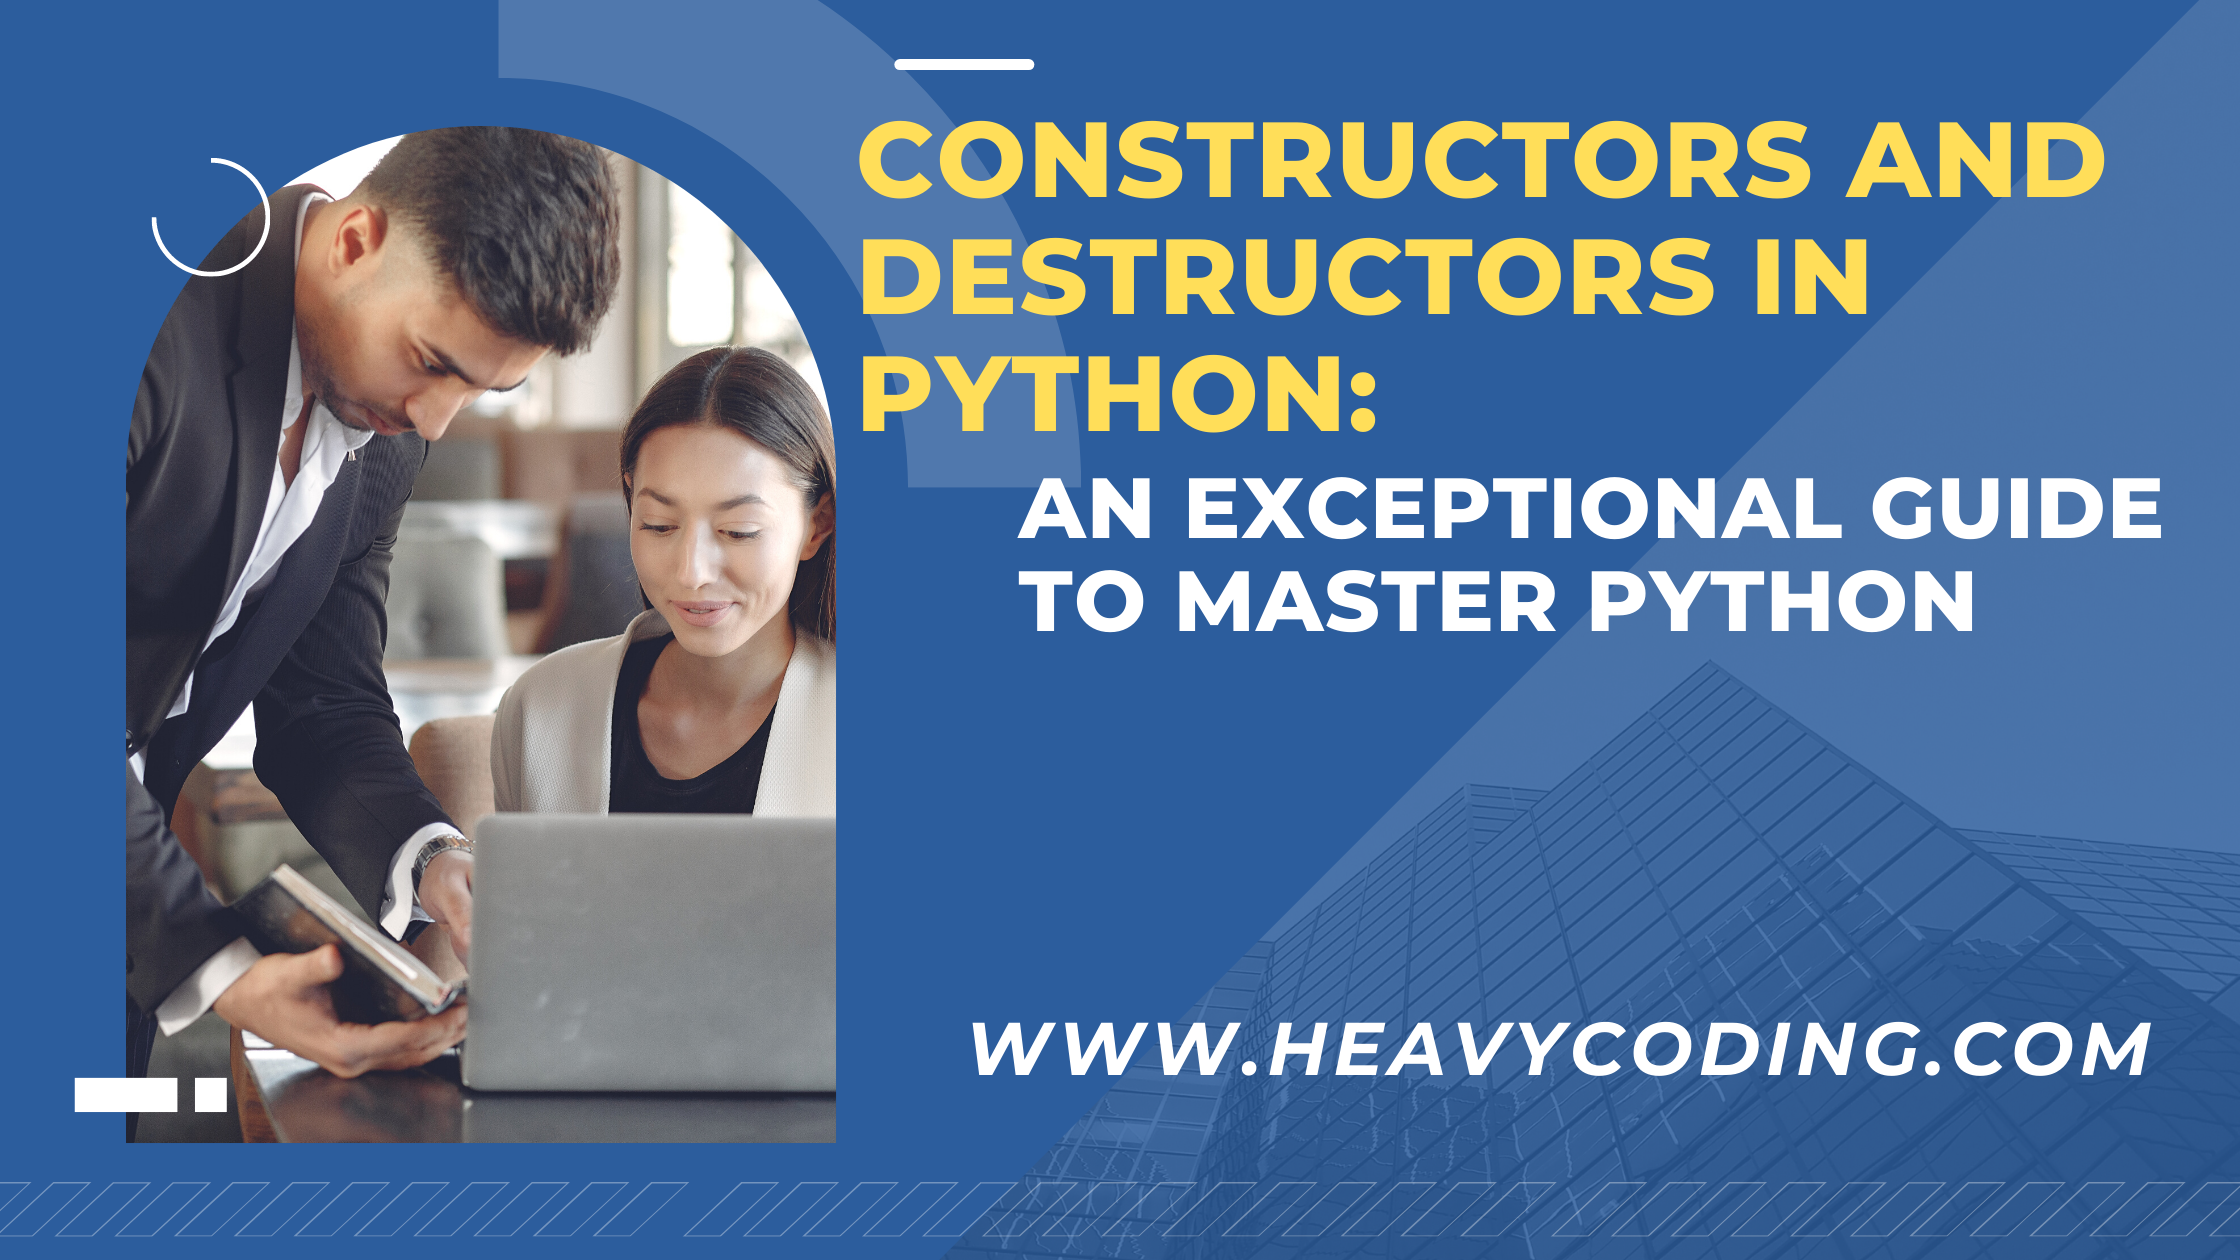 You are currently viewing Constructors and Destructors in Python: An Exceptional Guide to Master Python